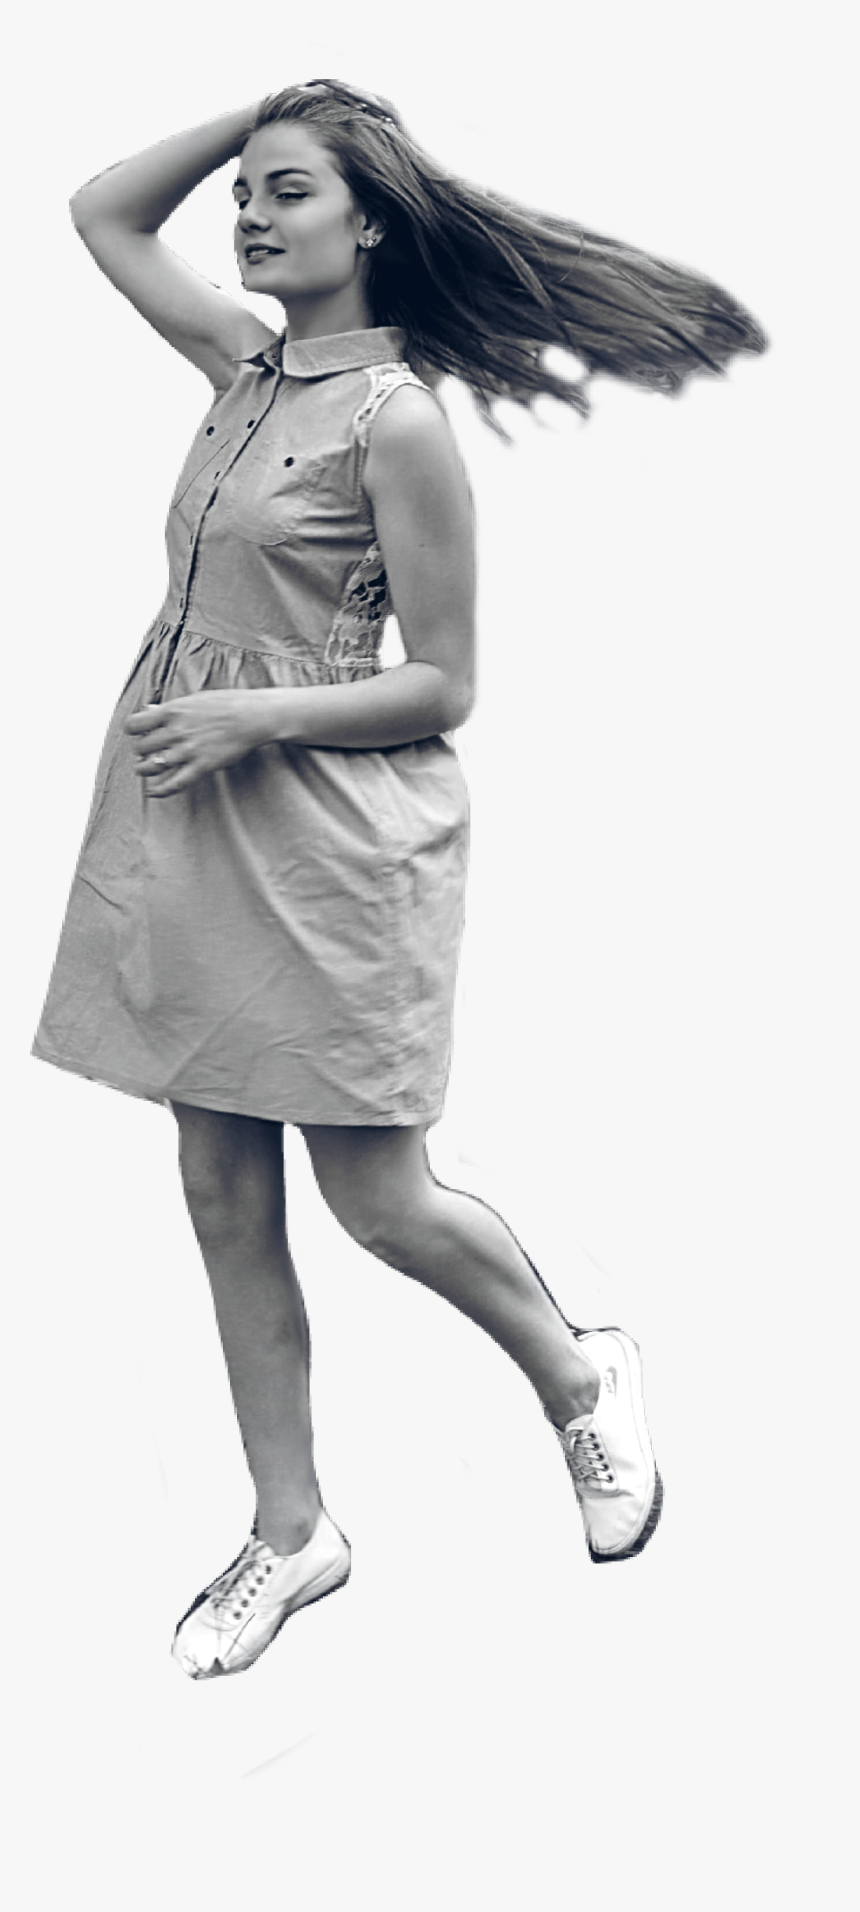 Denis #girl #running #happy #hair #flowing #smile #dress - Tights, HD Png Download, Free Download